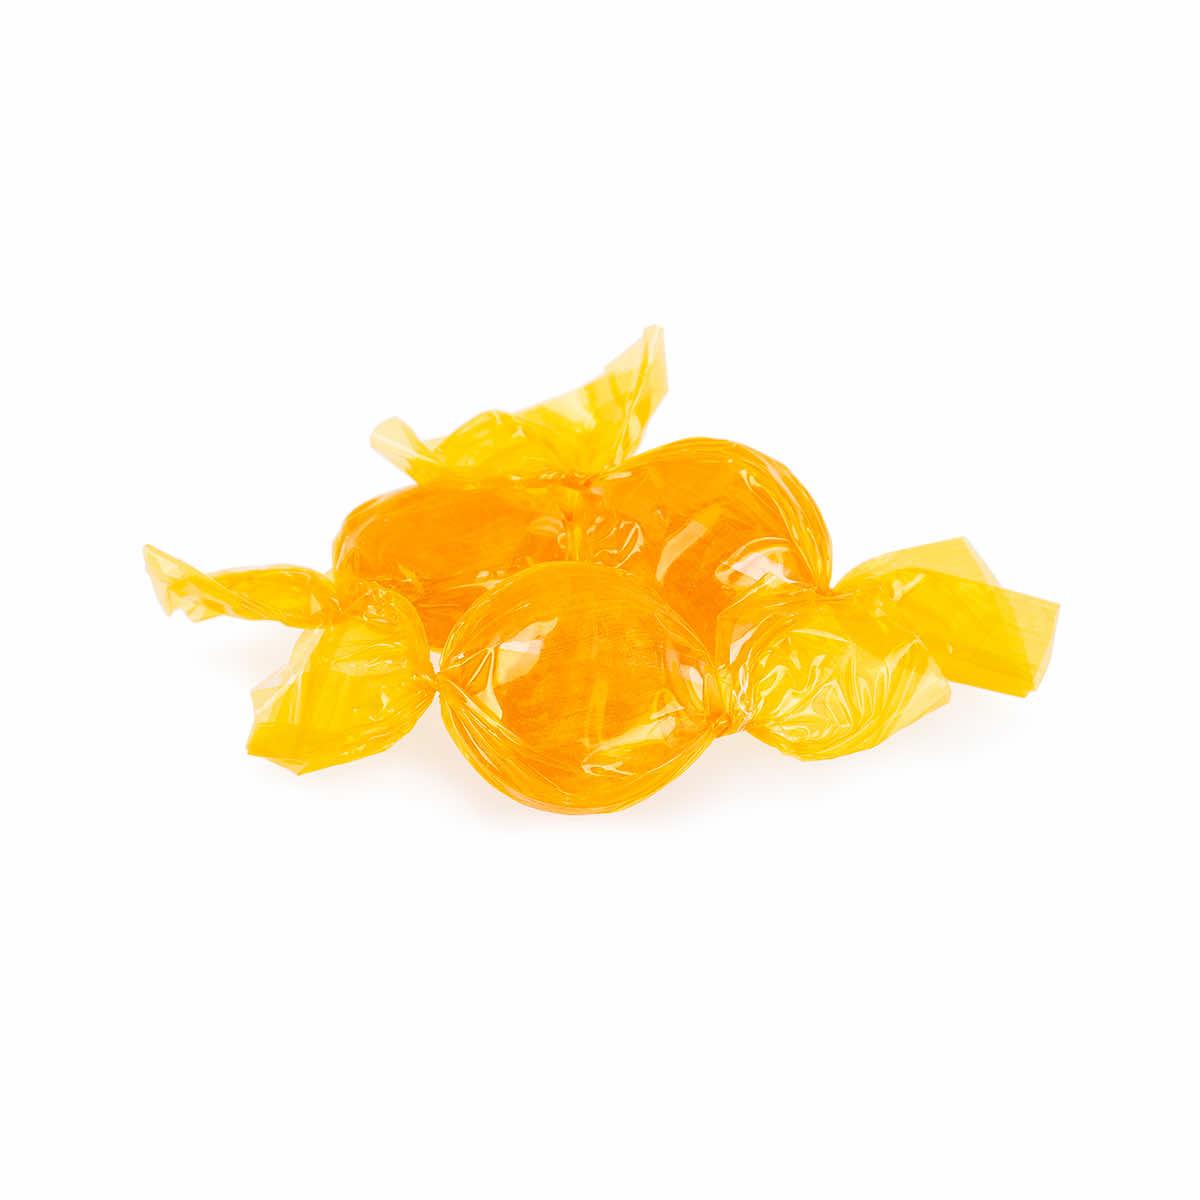  Butterscotch Hard Candy, 2 lb Sugar-Free Old-Fashioned  Christmas Candy, : Grocery & Gourmet Food